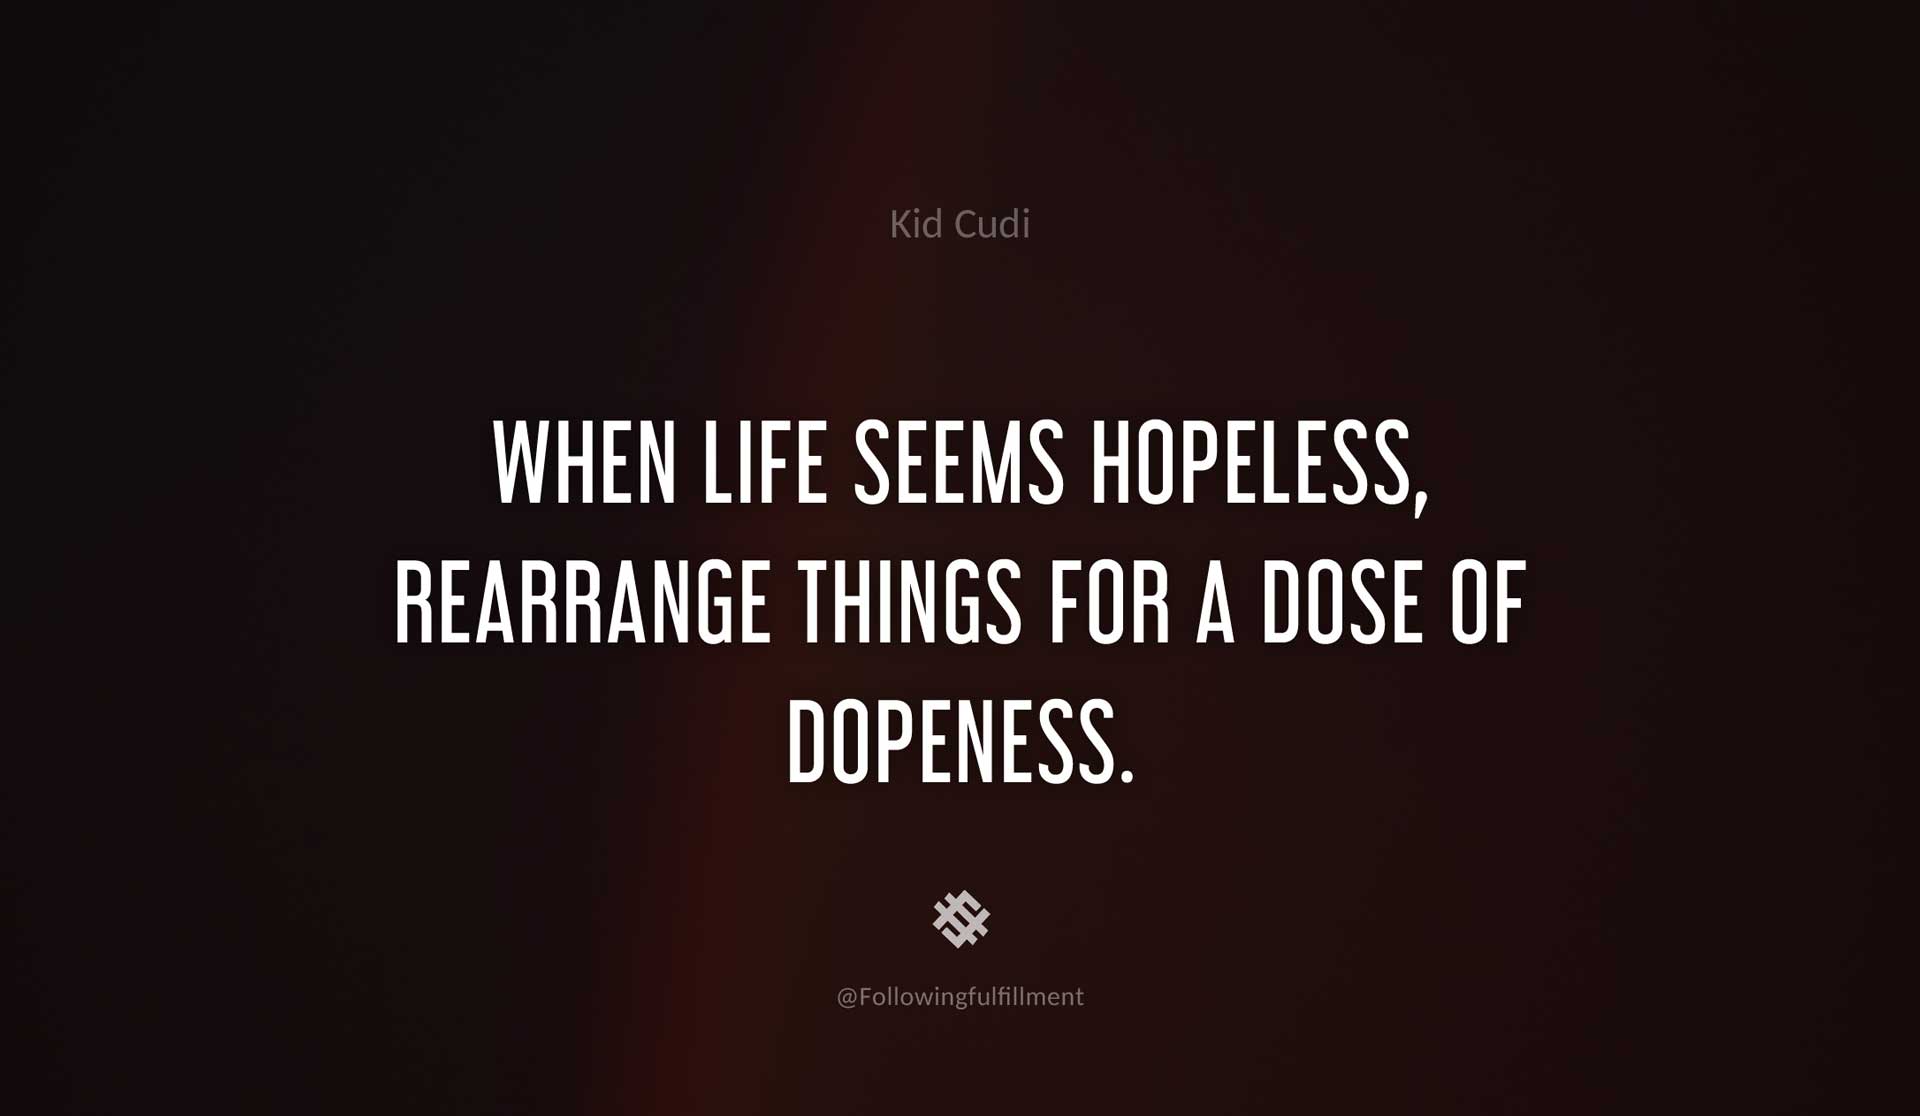 When-life-seems-hopeless,-rearrange-things-for-a-dose-of-dopeness.-KID-CUDI-Quote.jpg